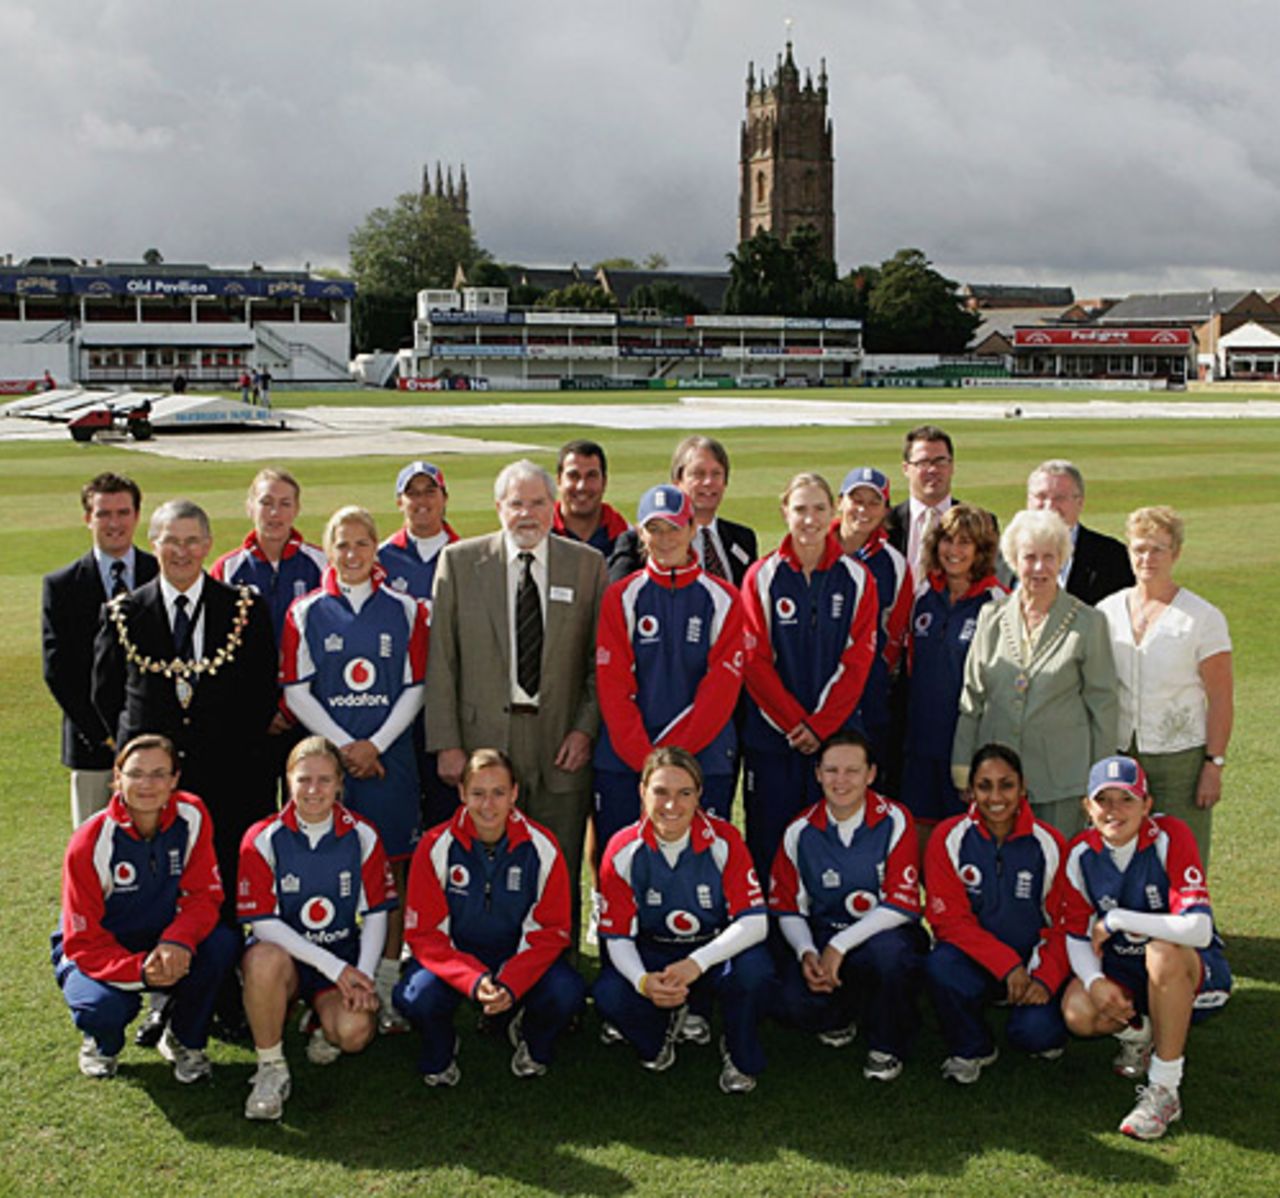 England Women pose at their new home, Taunton, England v India, 2nd Test, Taunton, August 29, 2006